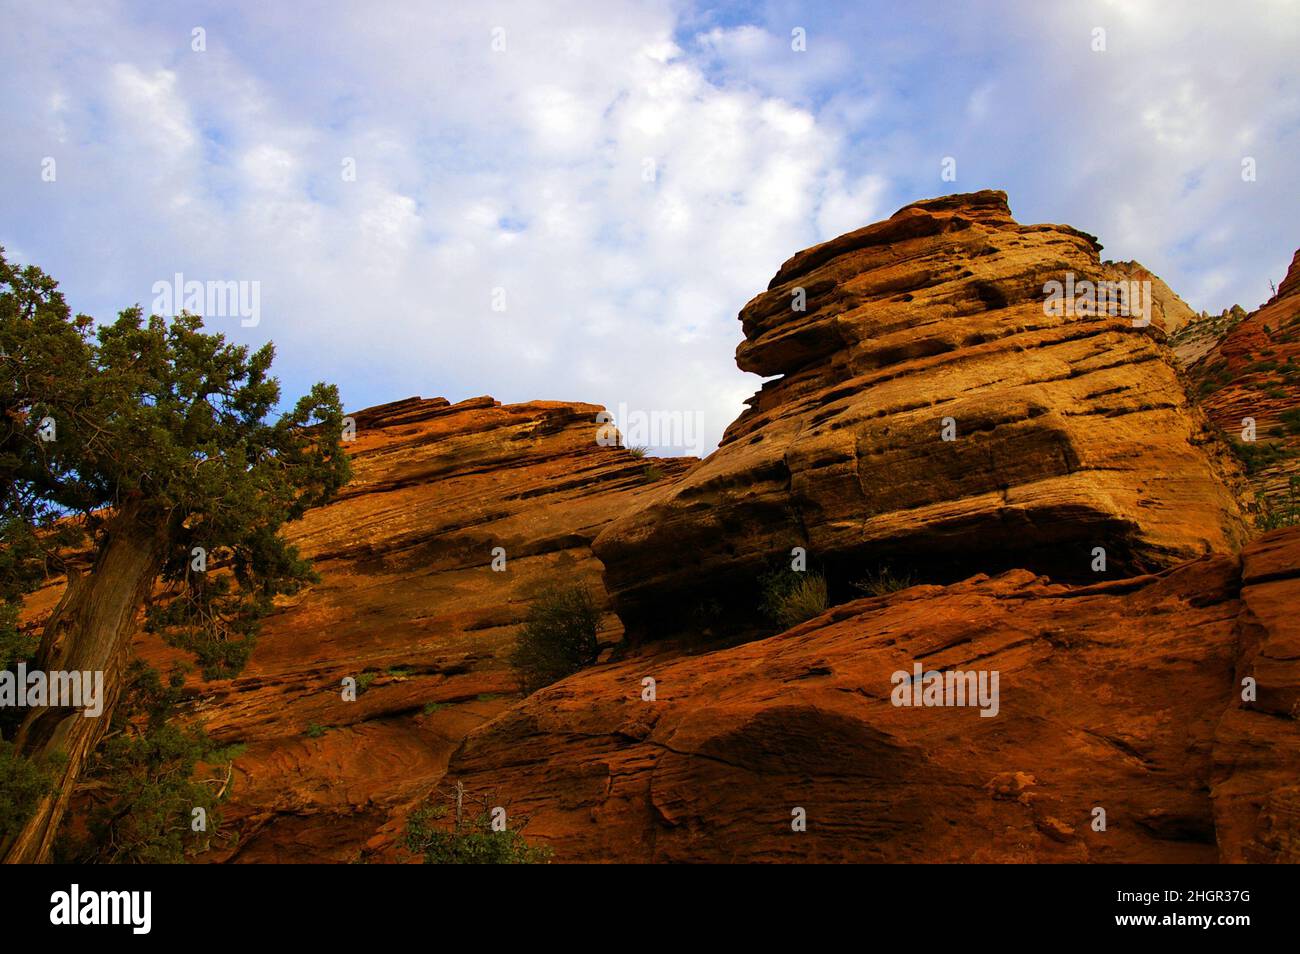 Sandstone rock formations in the desert southwest Stock Photo